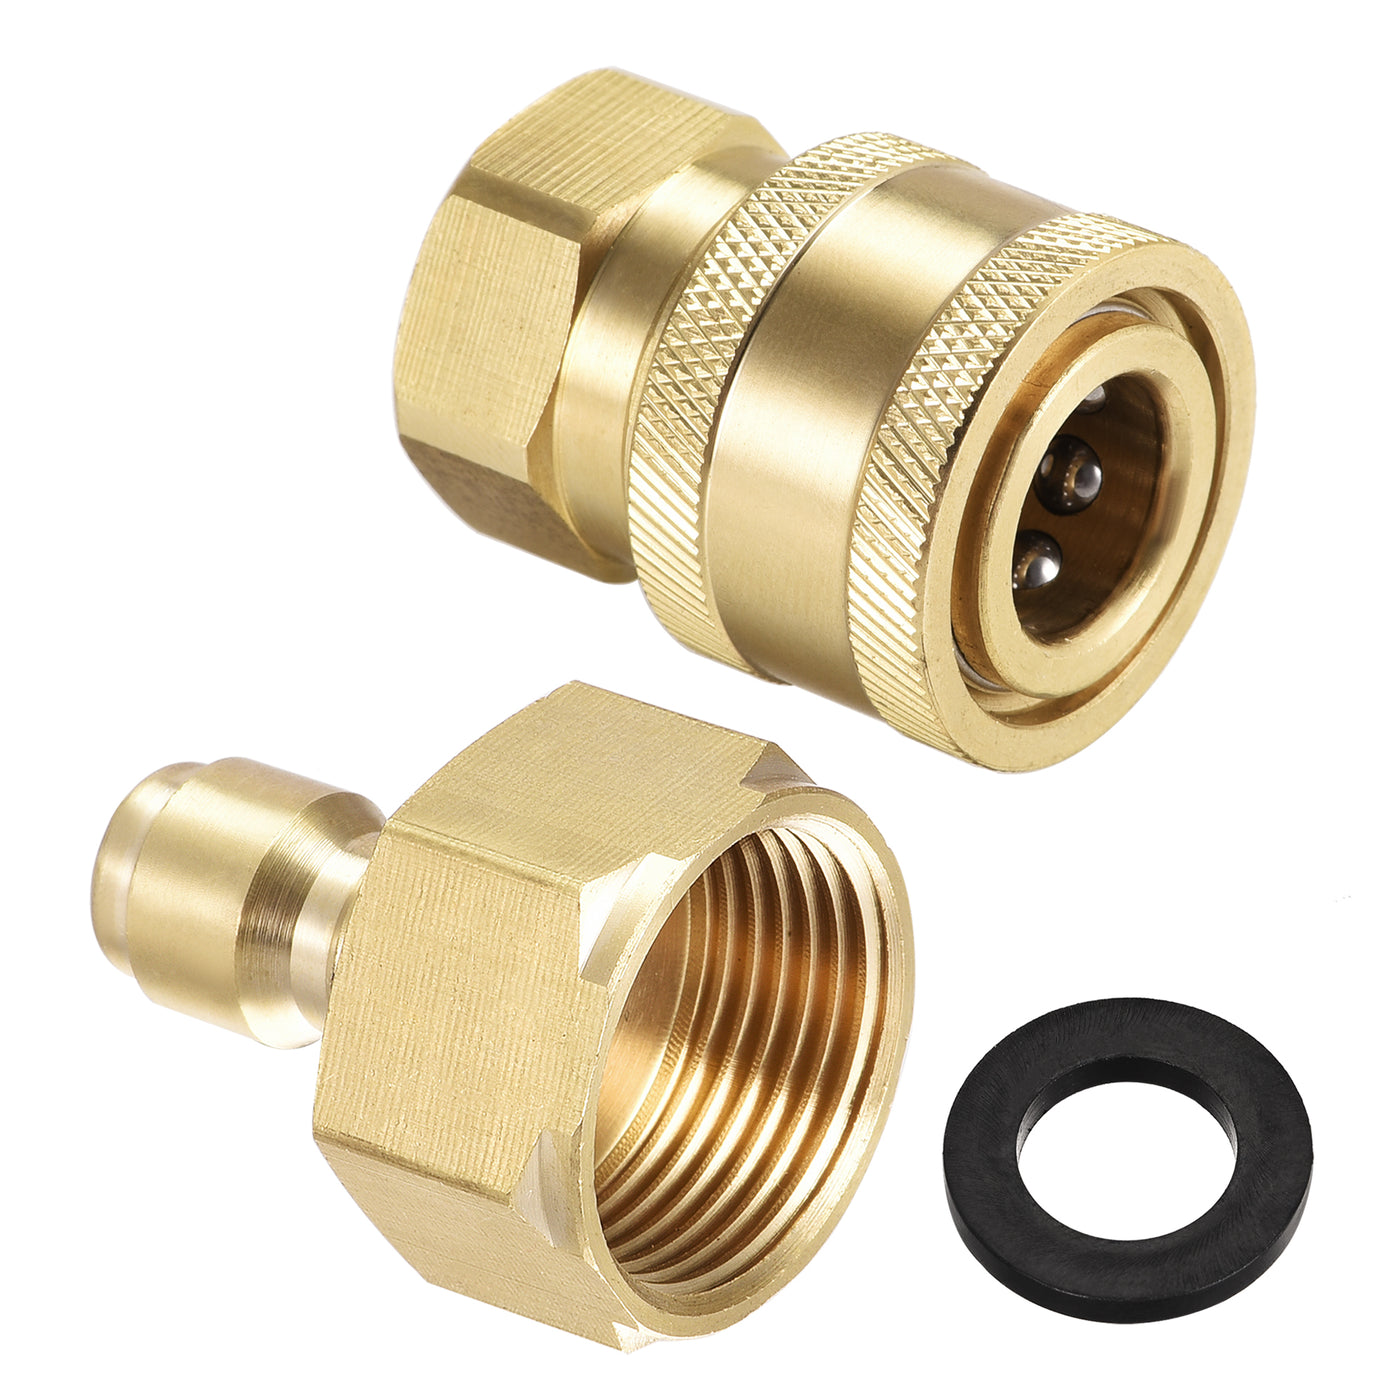 uxcell Uxcell Brass Quick Connector Set M22x1.5 & M14x1.5 Female Thread